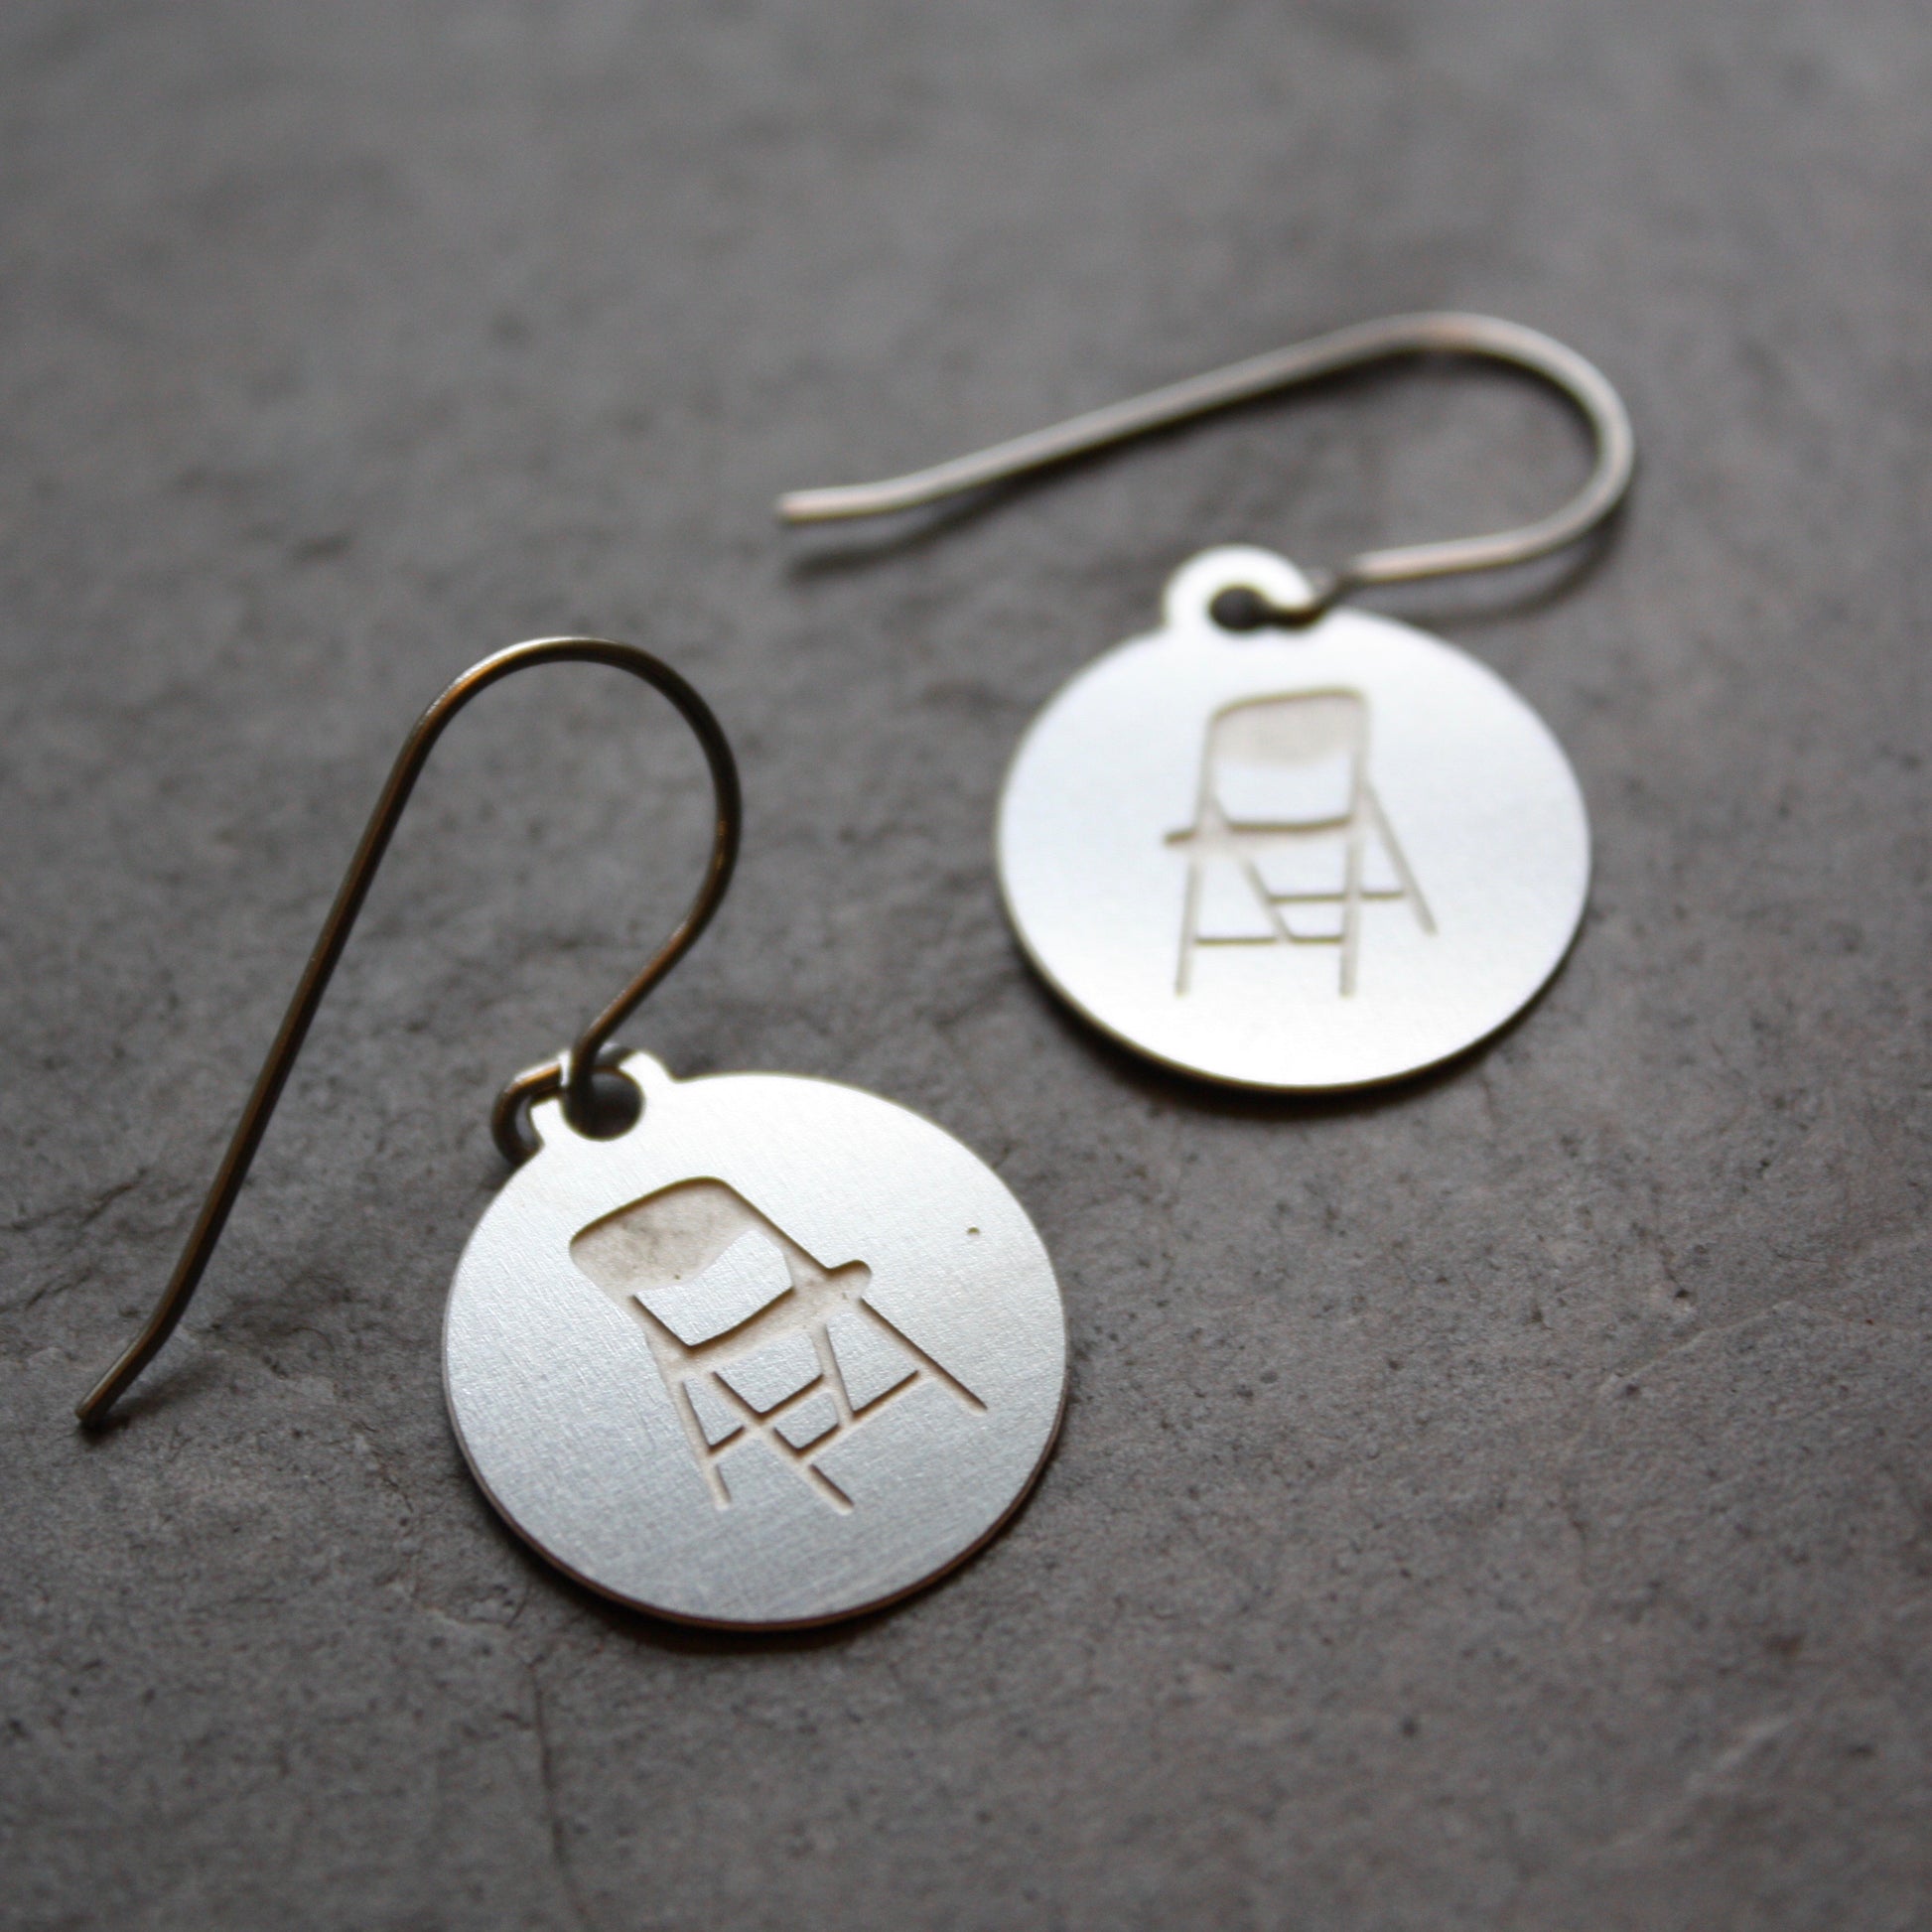 Pittsburgh Parking Chair earrings by Audra Azoury